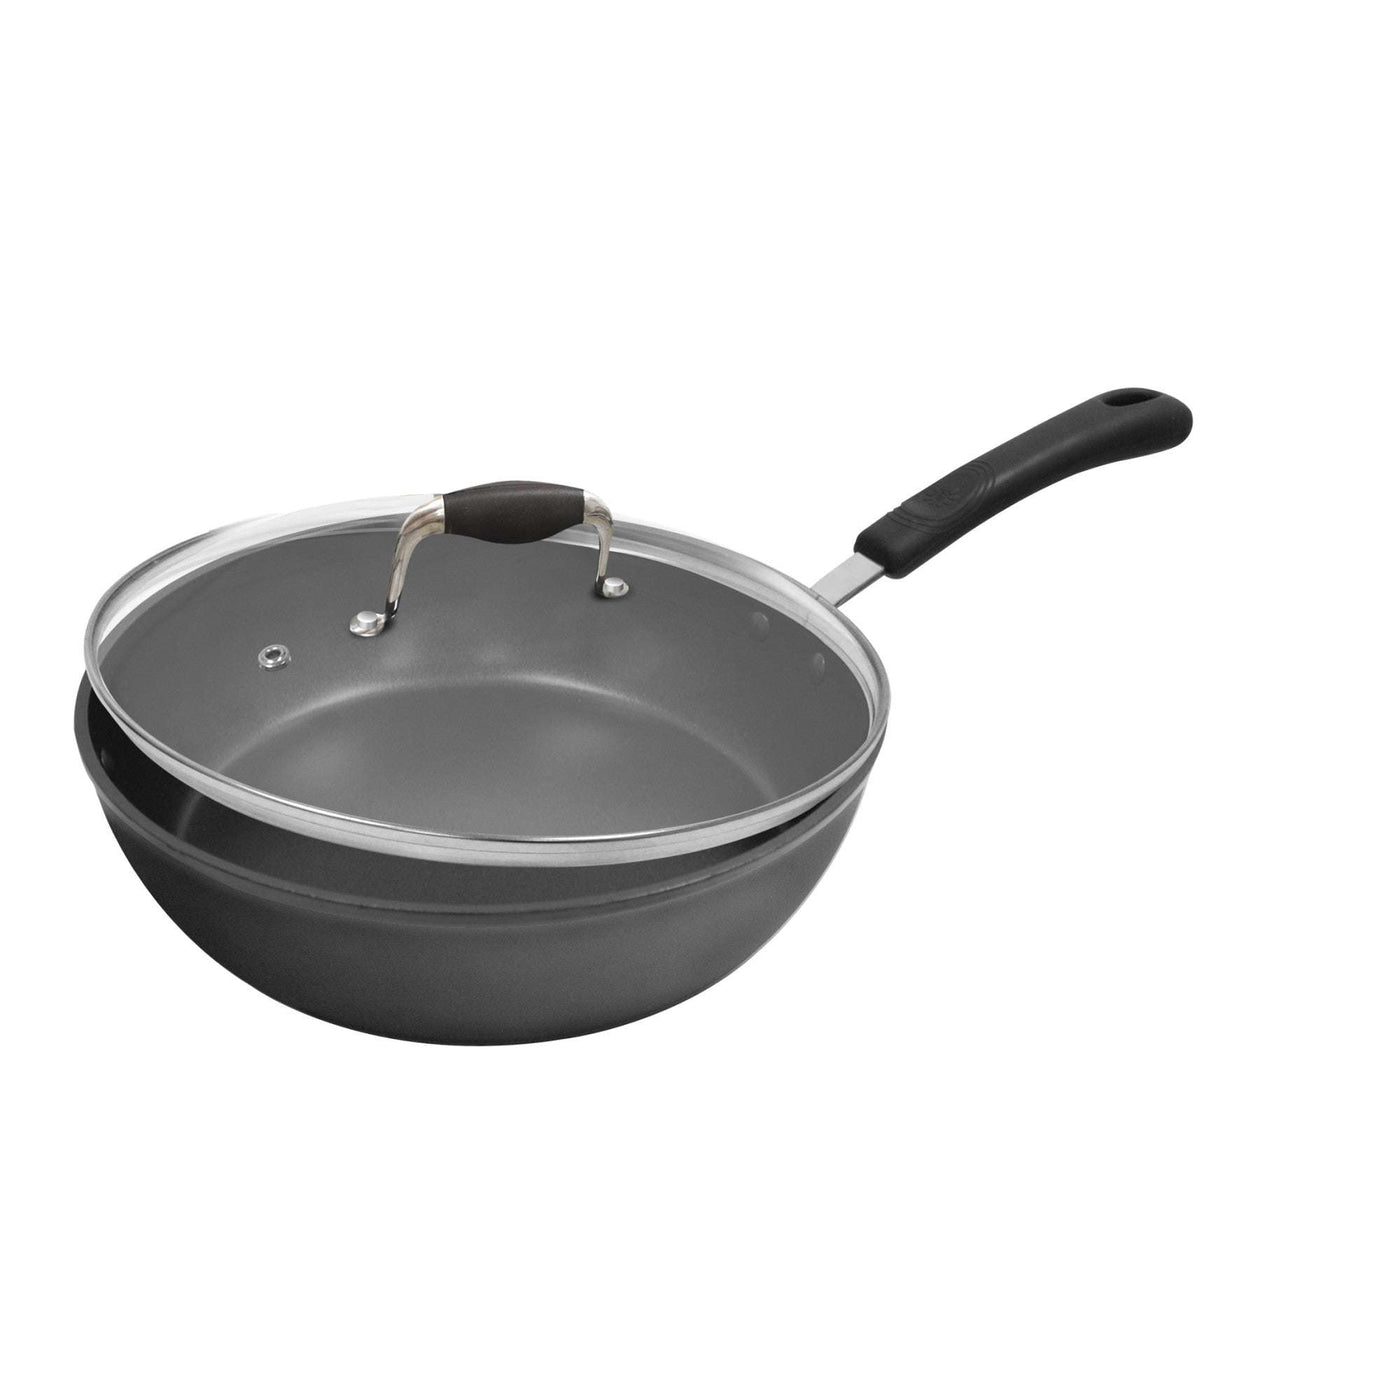 12Inch Nonstick Deep Frying Pan,5Qt Non Stick Saute Pan with Lid